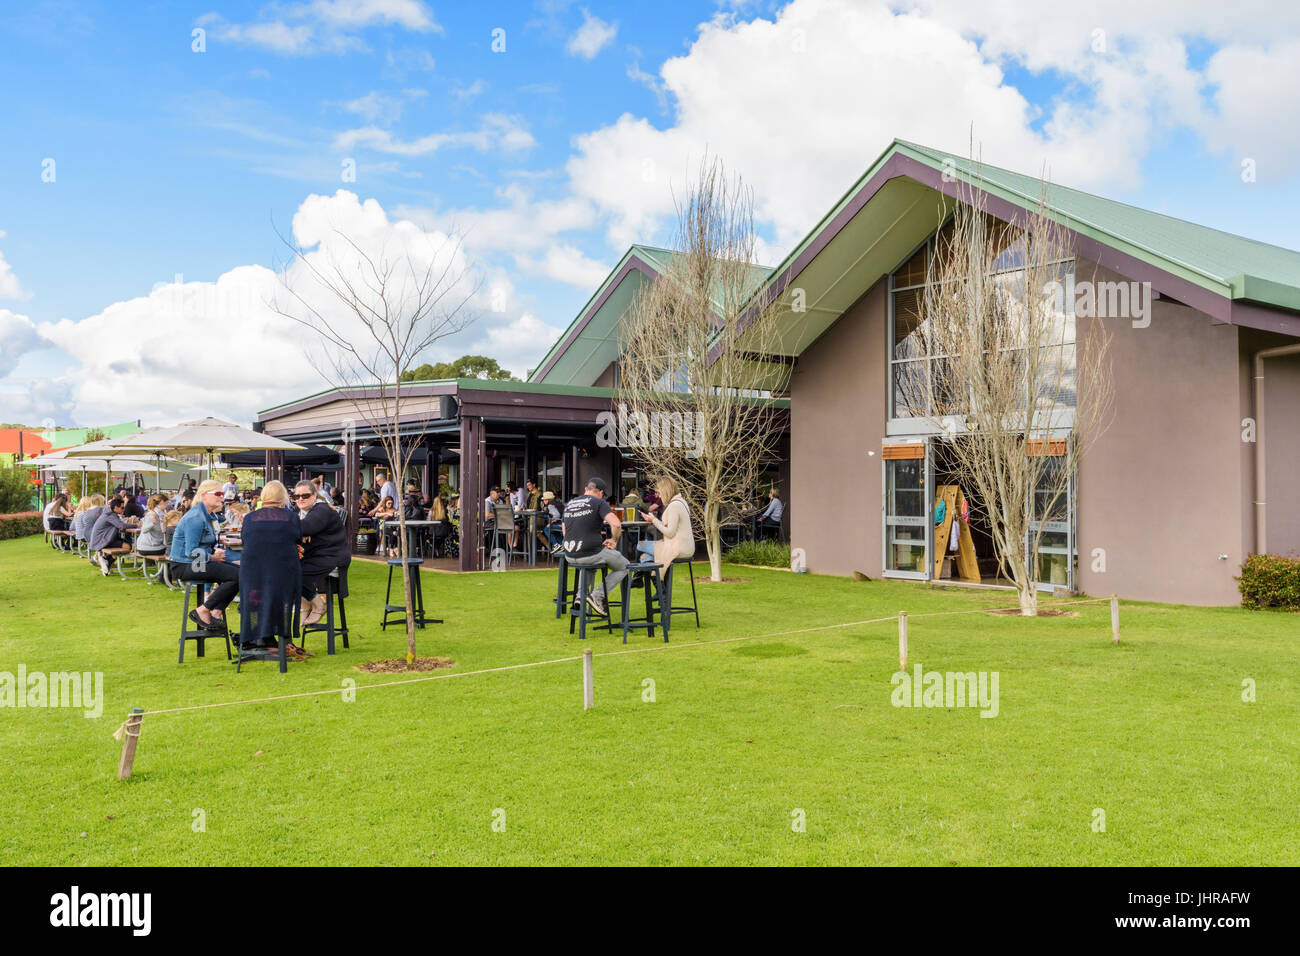 The beer garden of the Cheeky Monkey Brewery, Wilyabrup, Western Australia Stock Photo